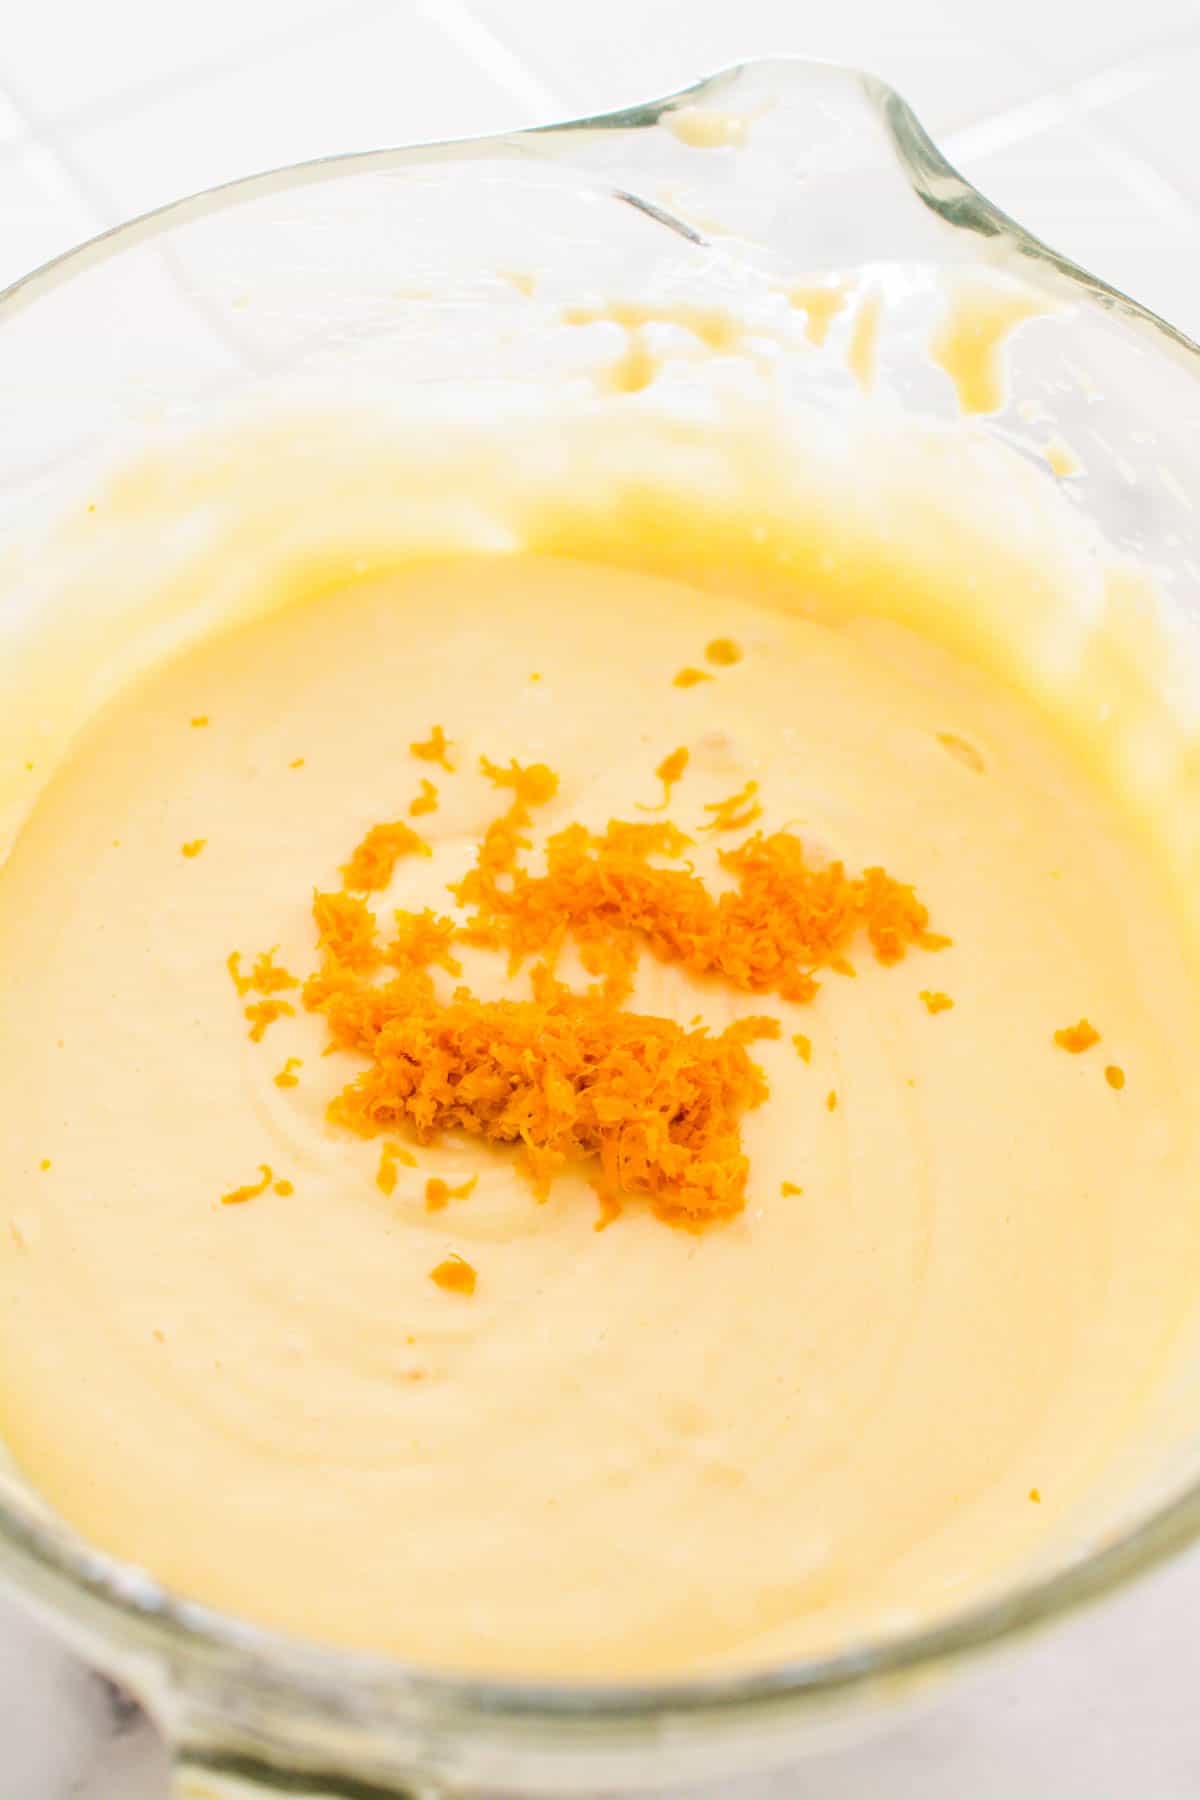 Cake batter in a glass bowl with orange zest on top.